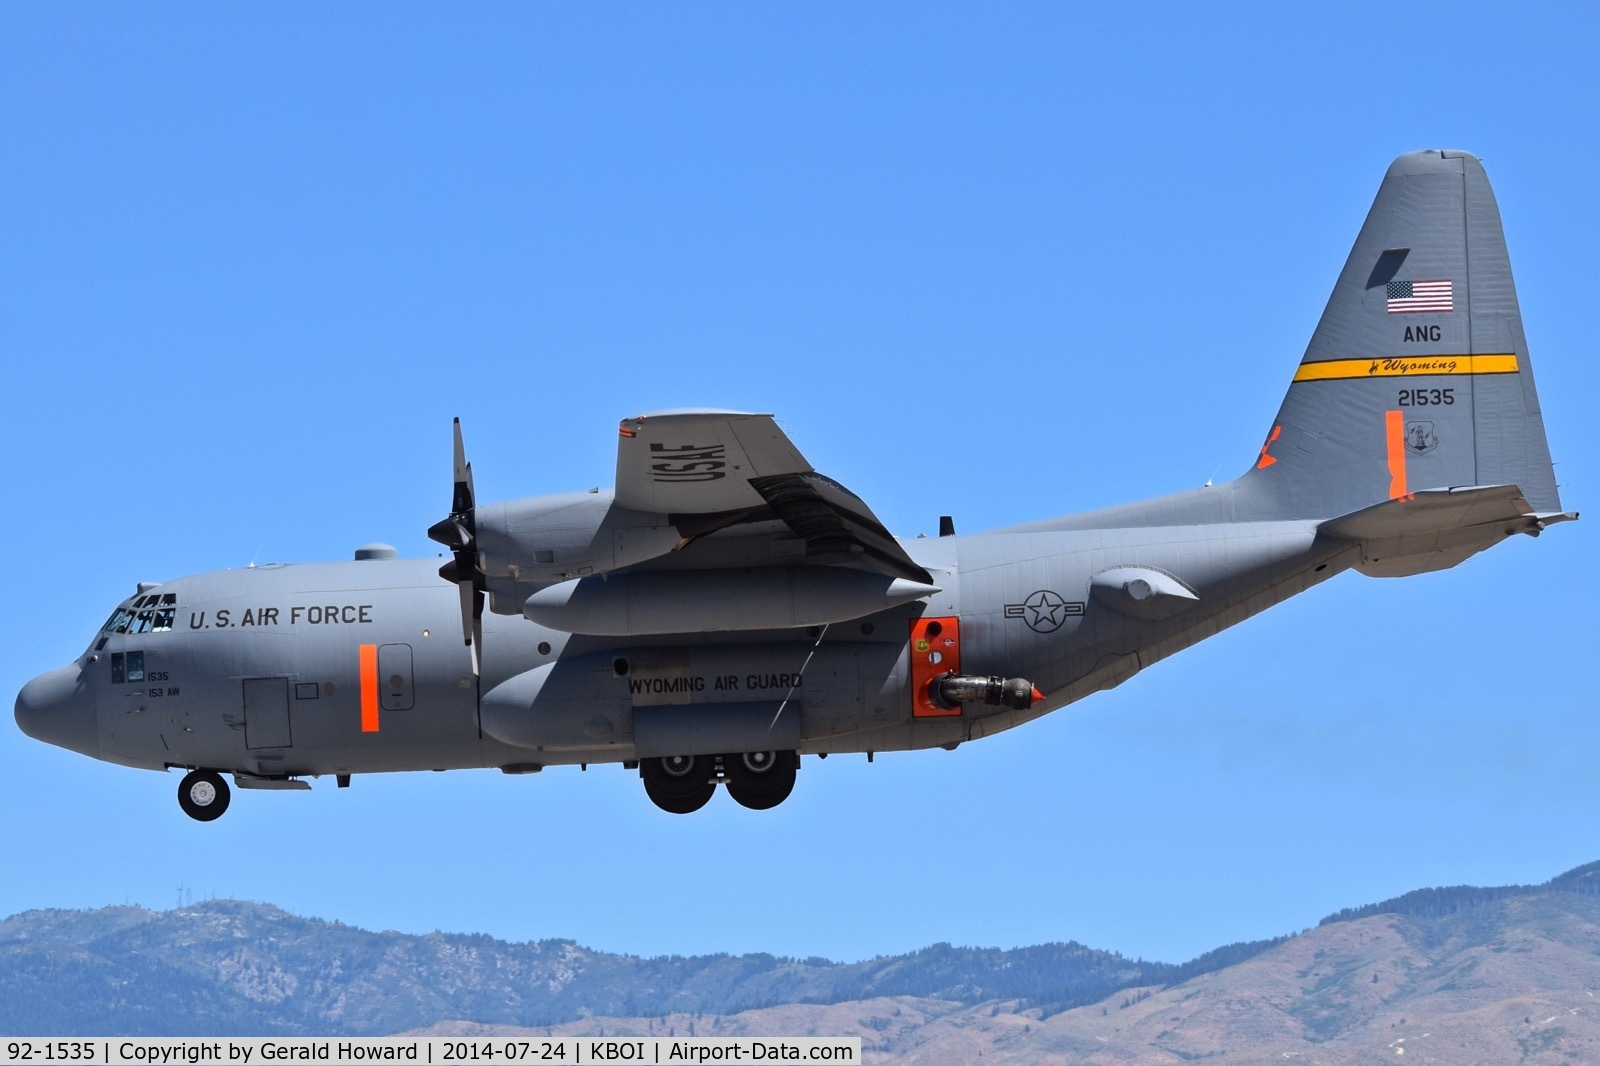 92-1535, 1992 Lockheed C-130H Hercules C/N 382-5324, Over the numbers for RWY 28L.  153rd Airlift Wing, WY ANG